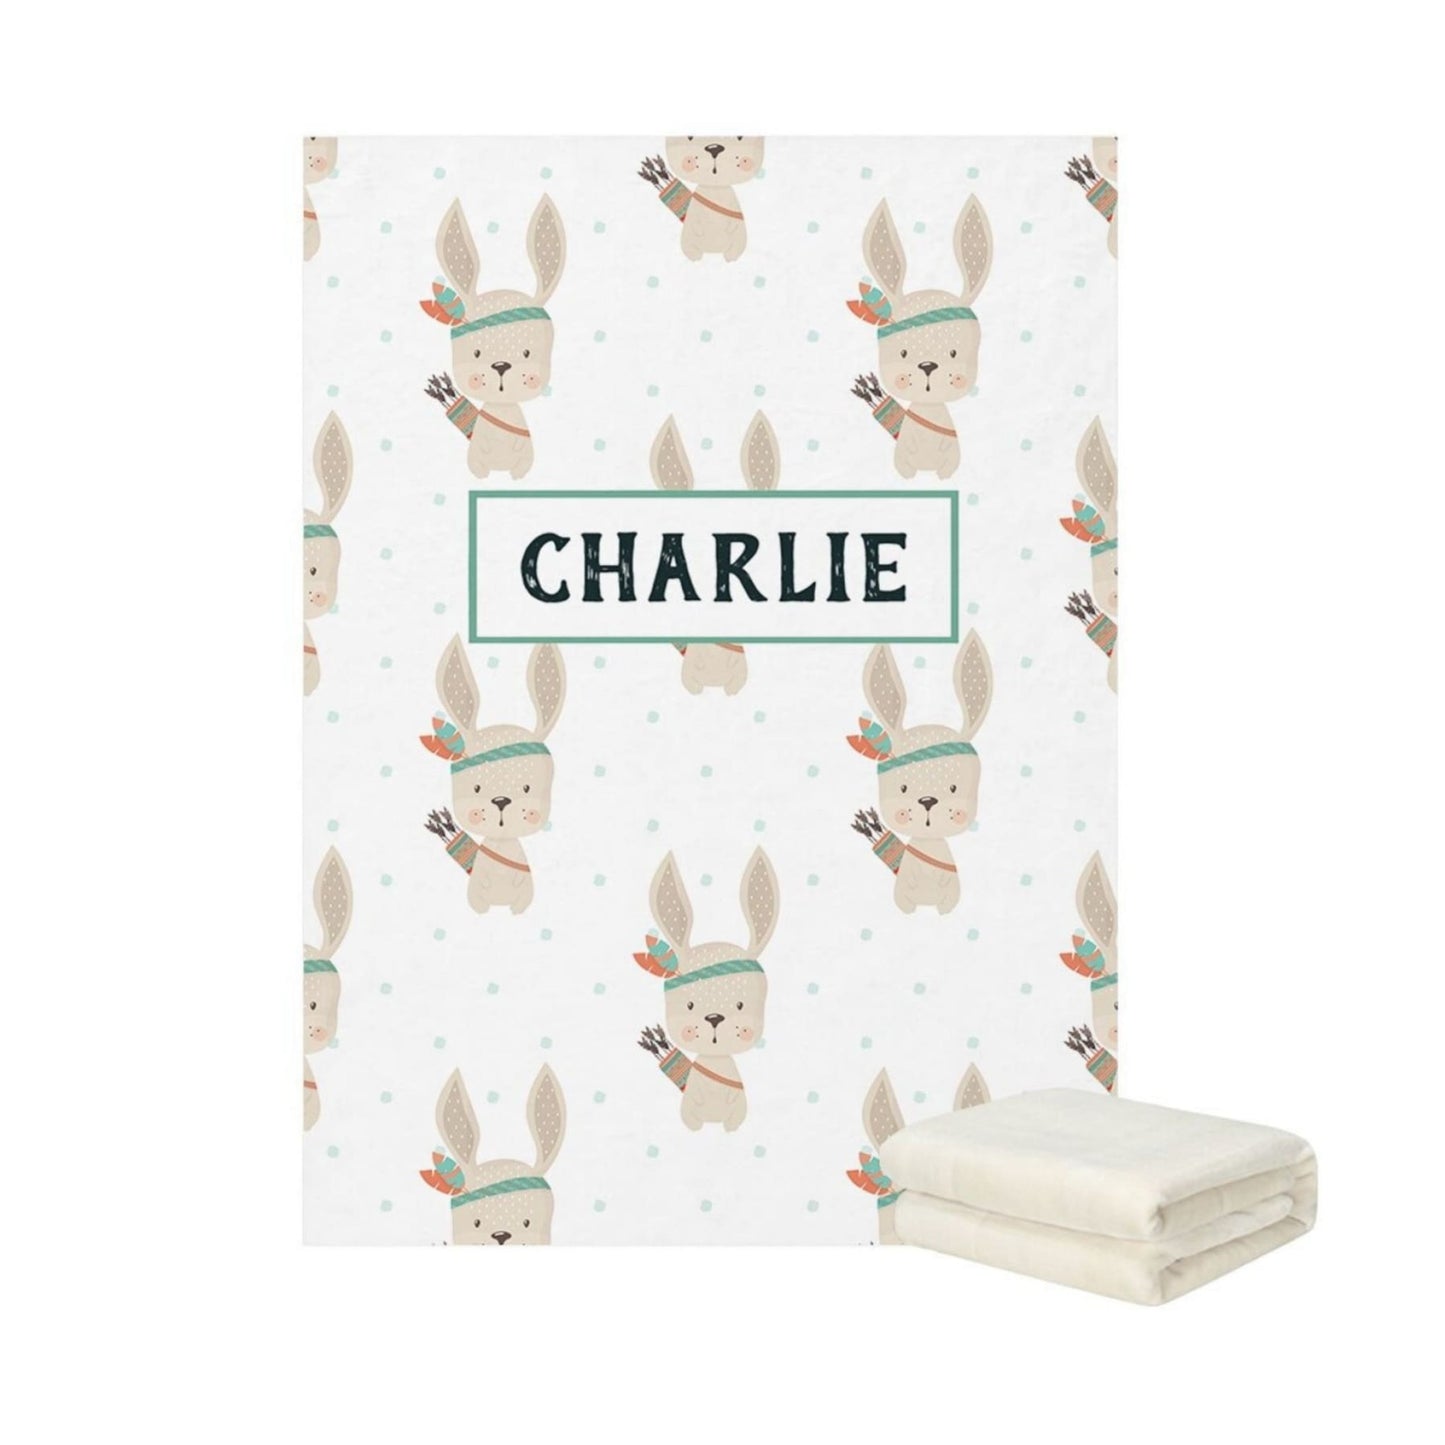 rabbit themed Personalized Baby Fleece Blanket with baby's name on it